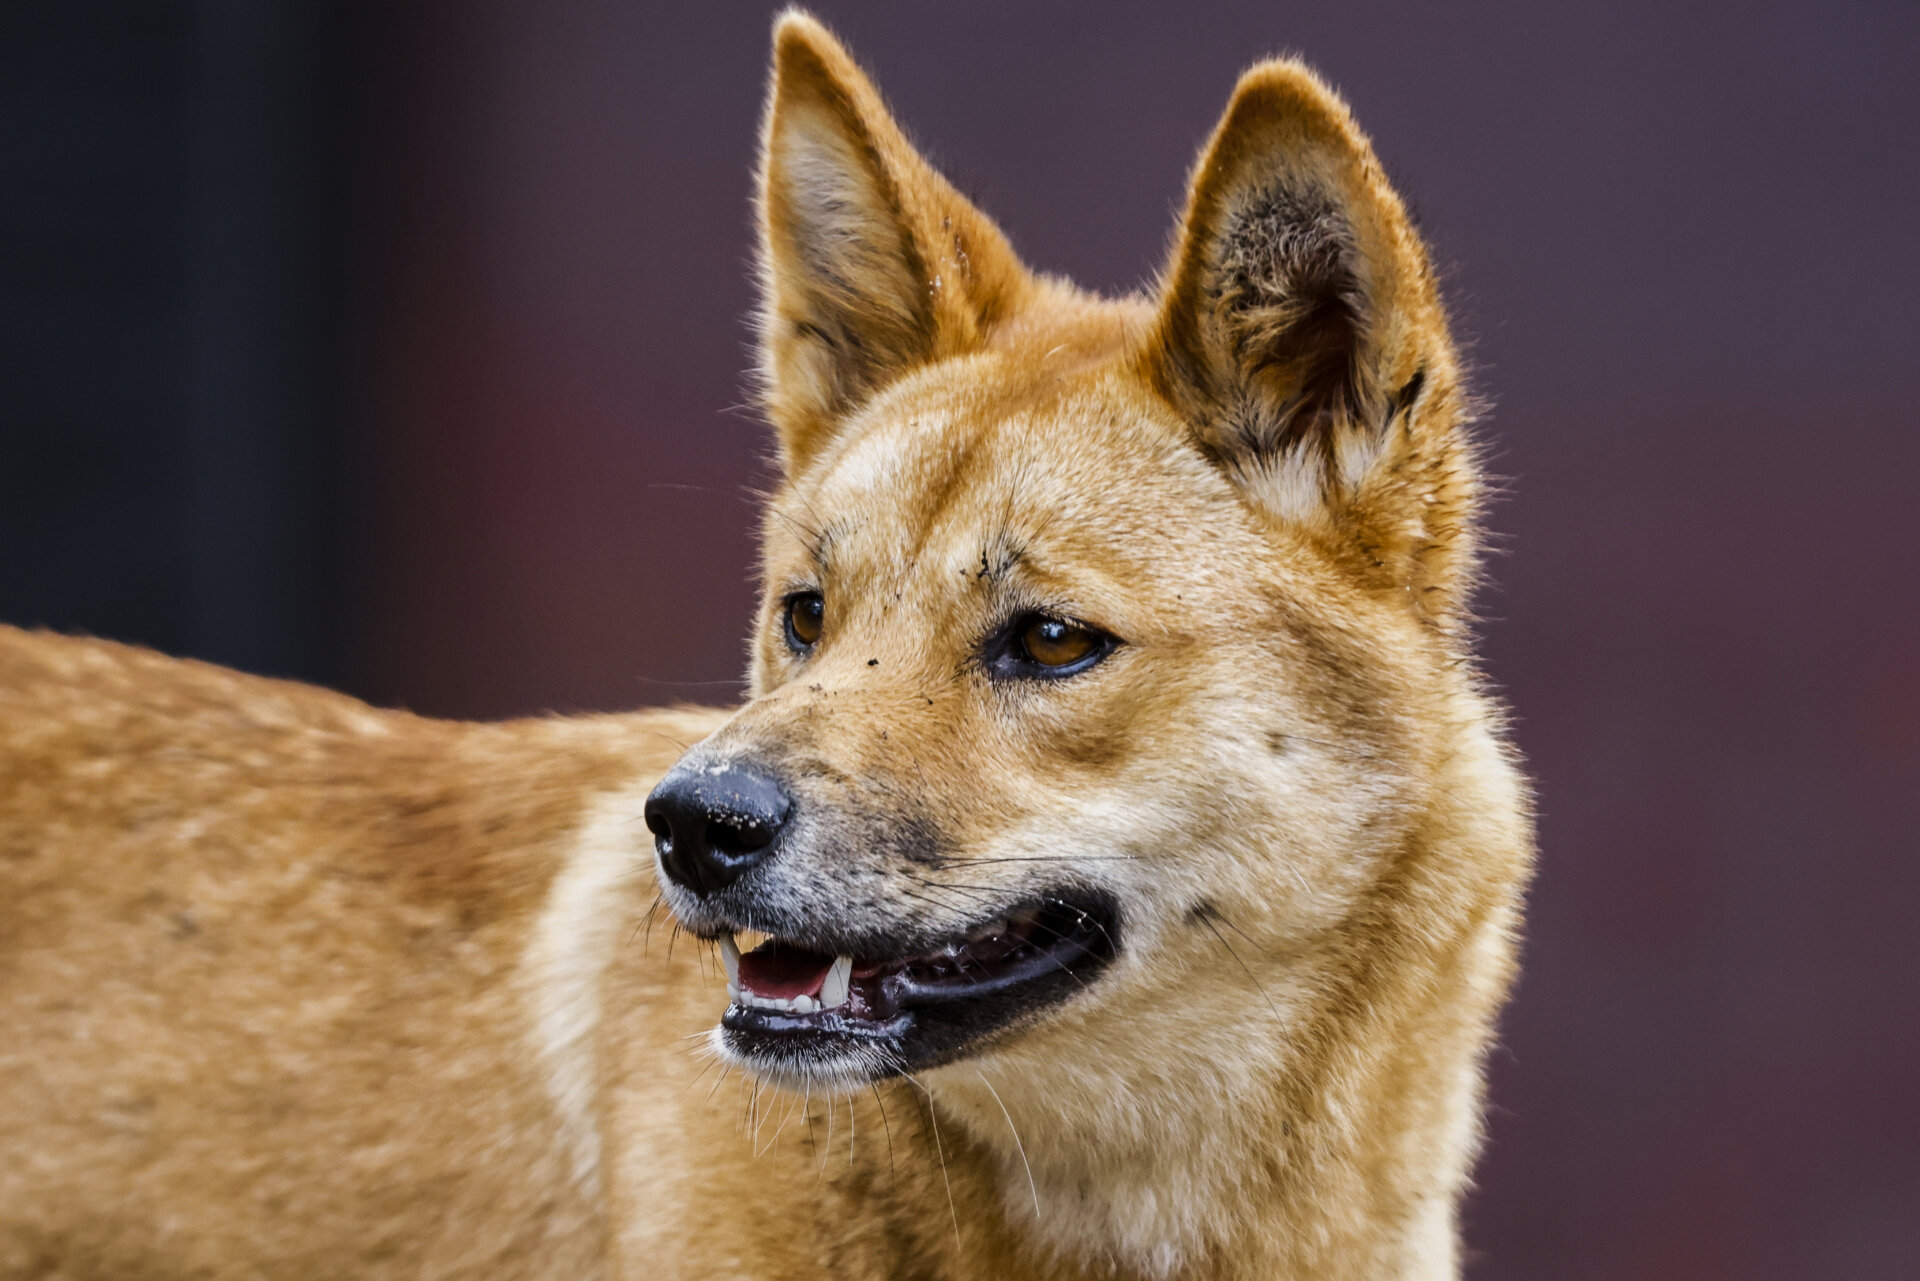 Dingos found to have little domestic dog DNA